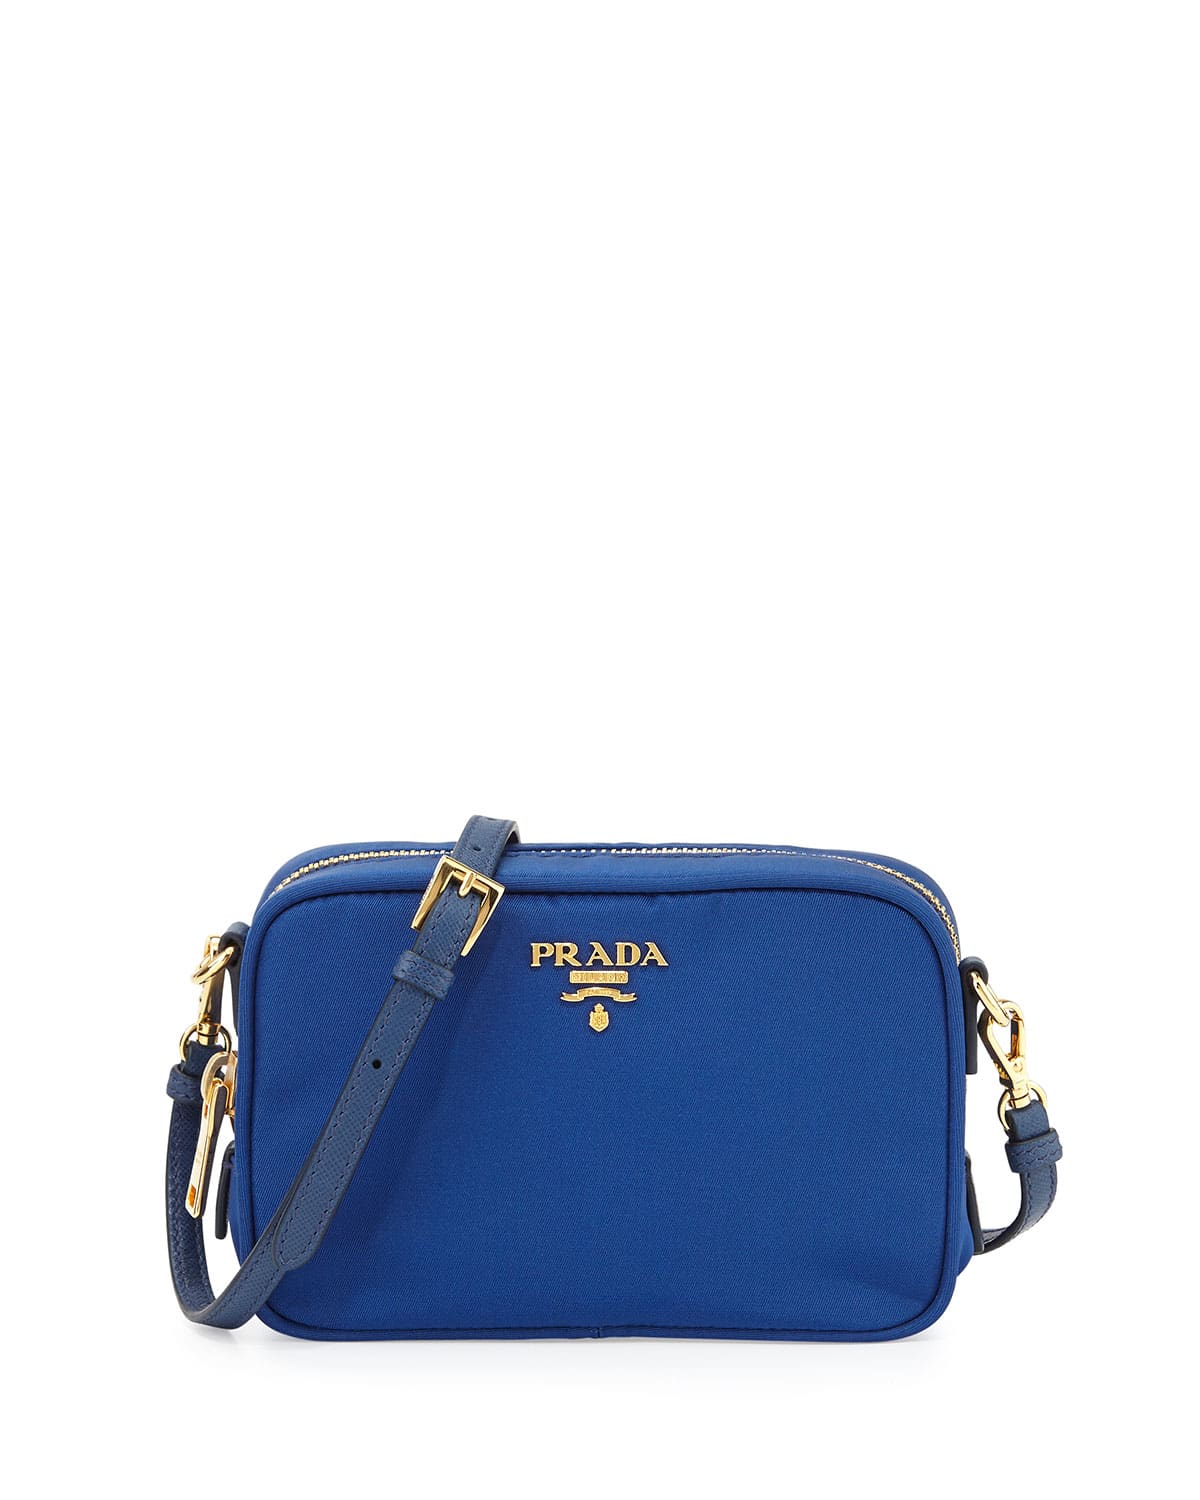 Prada Pre-Fall 2014 Bag Collection featuring new Double Totes in Suede – Spotted Fashion